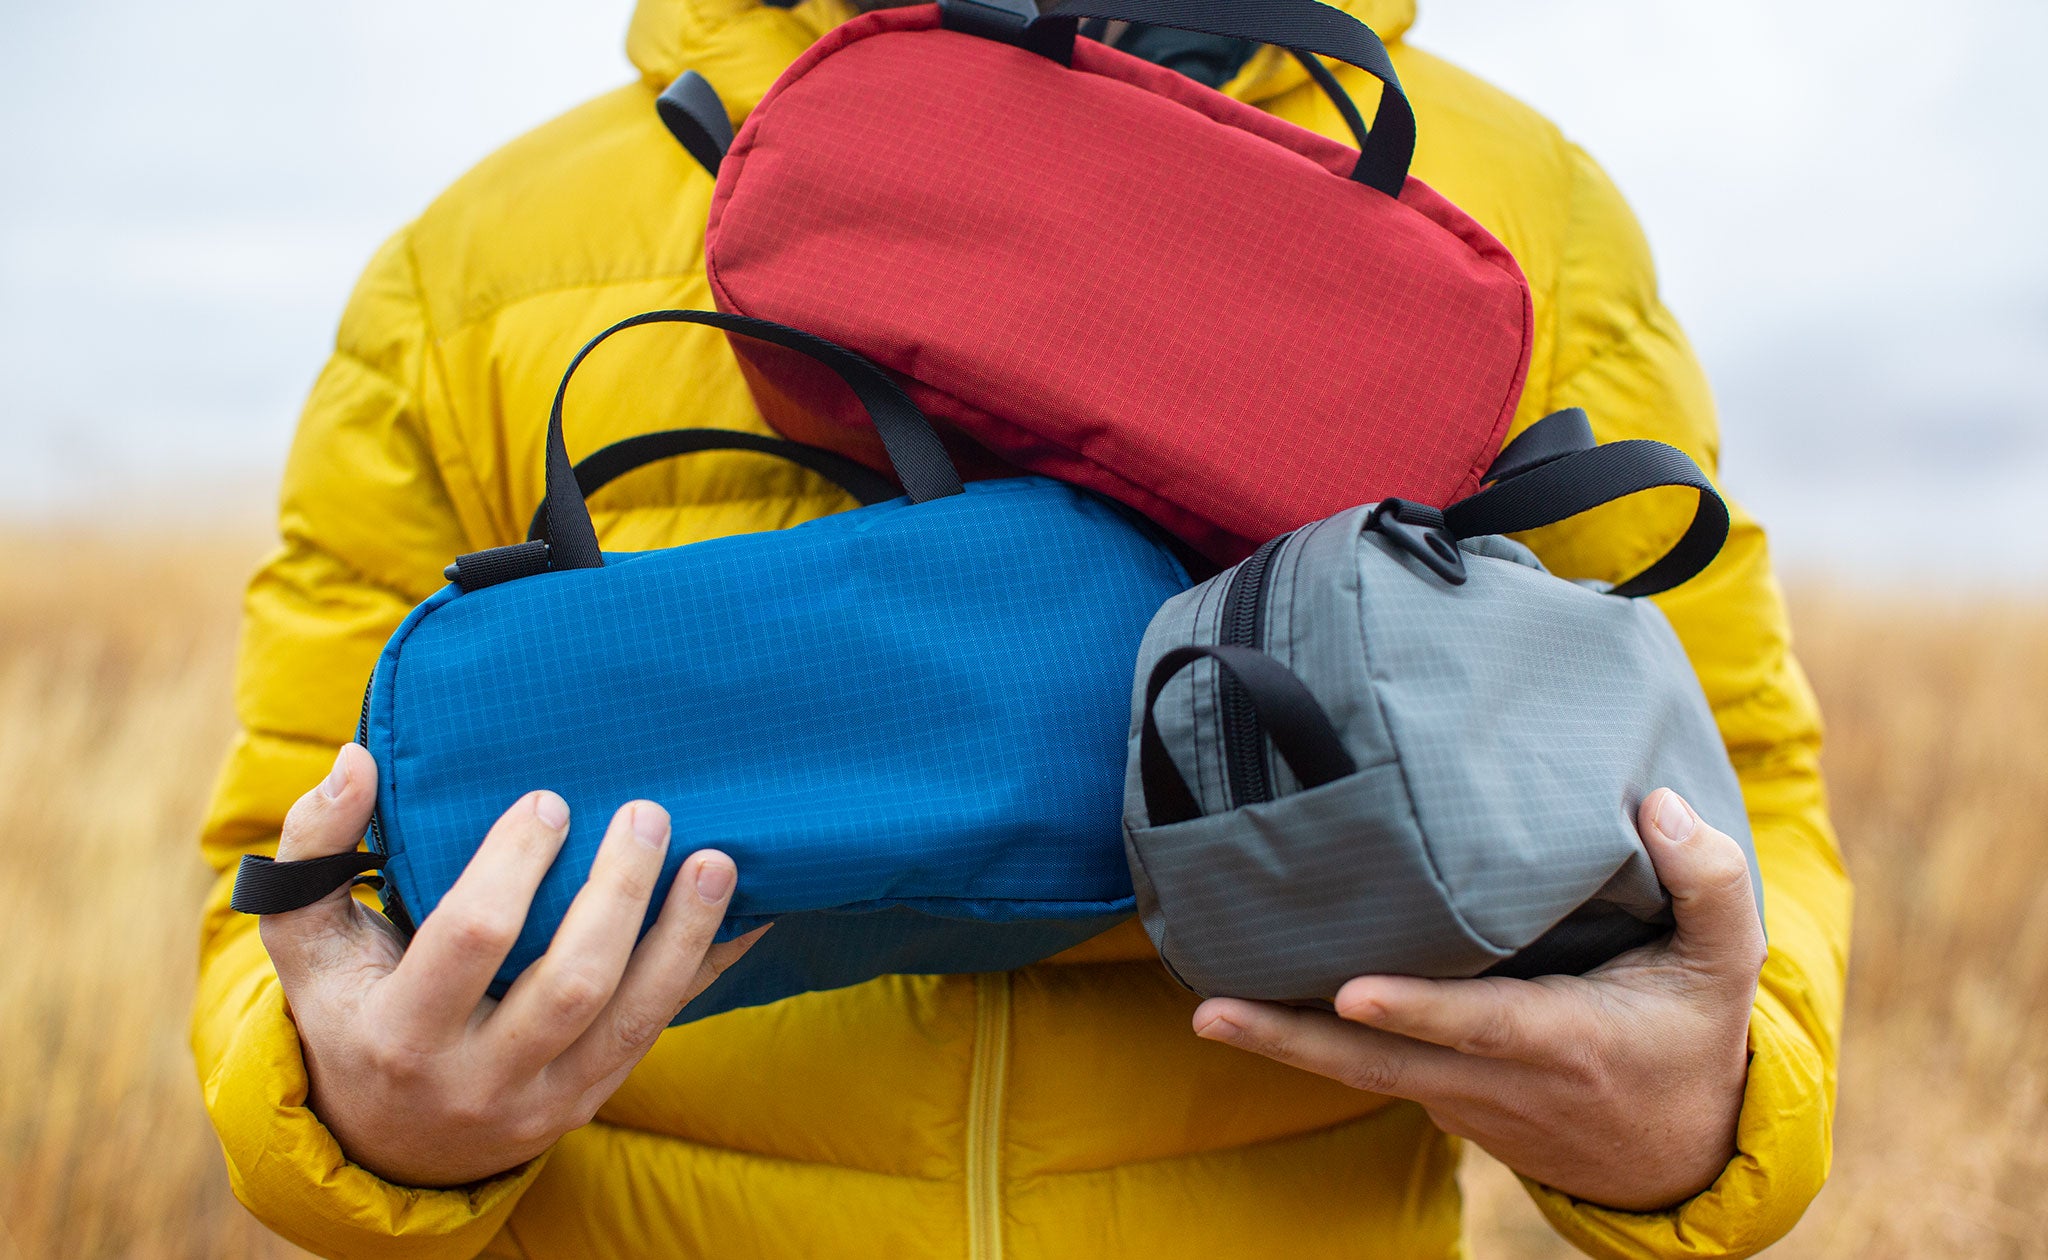 Person wearing a bright yellow down jacket holding three Grab Bags in Cerylon fabric: clockwise, it's Sangria red, Mountain grey, and Cobalt blue.